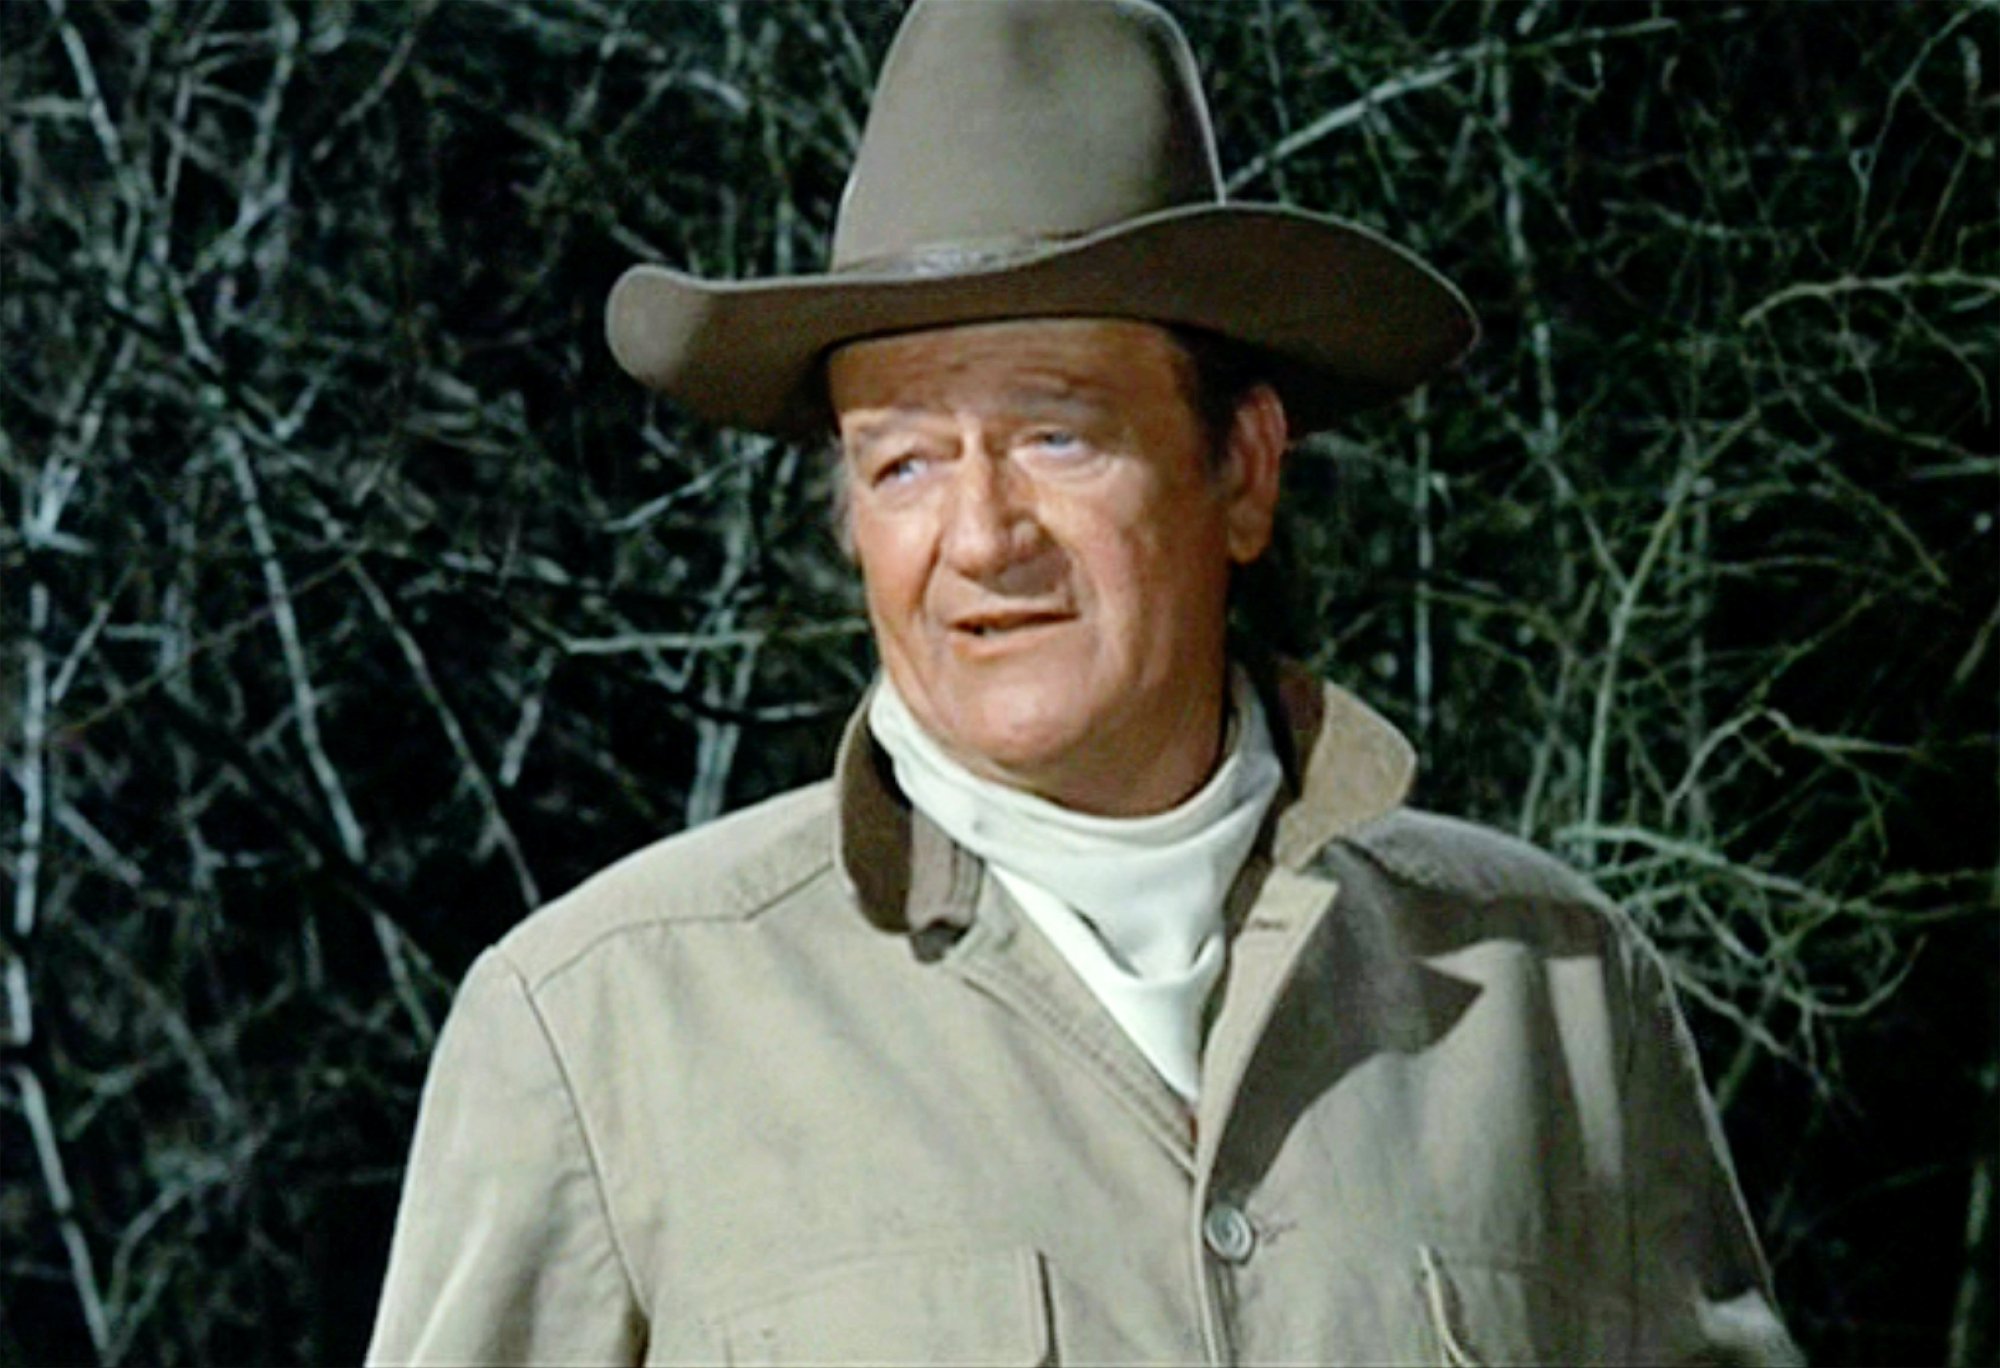 John Wayne at home in his Western clothes for 'Rio Lobo' with tree branches in the background